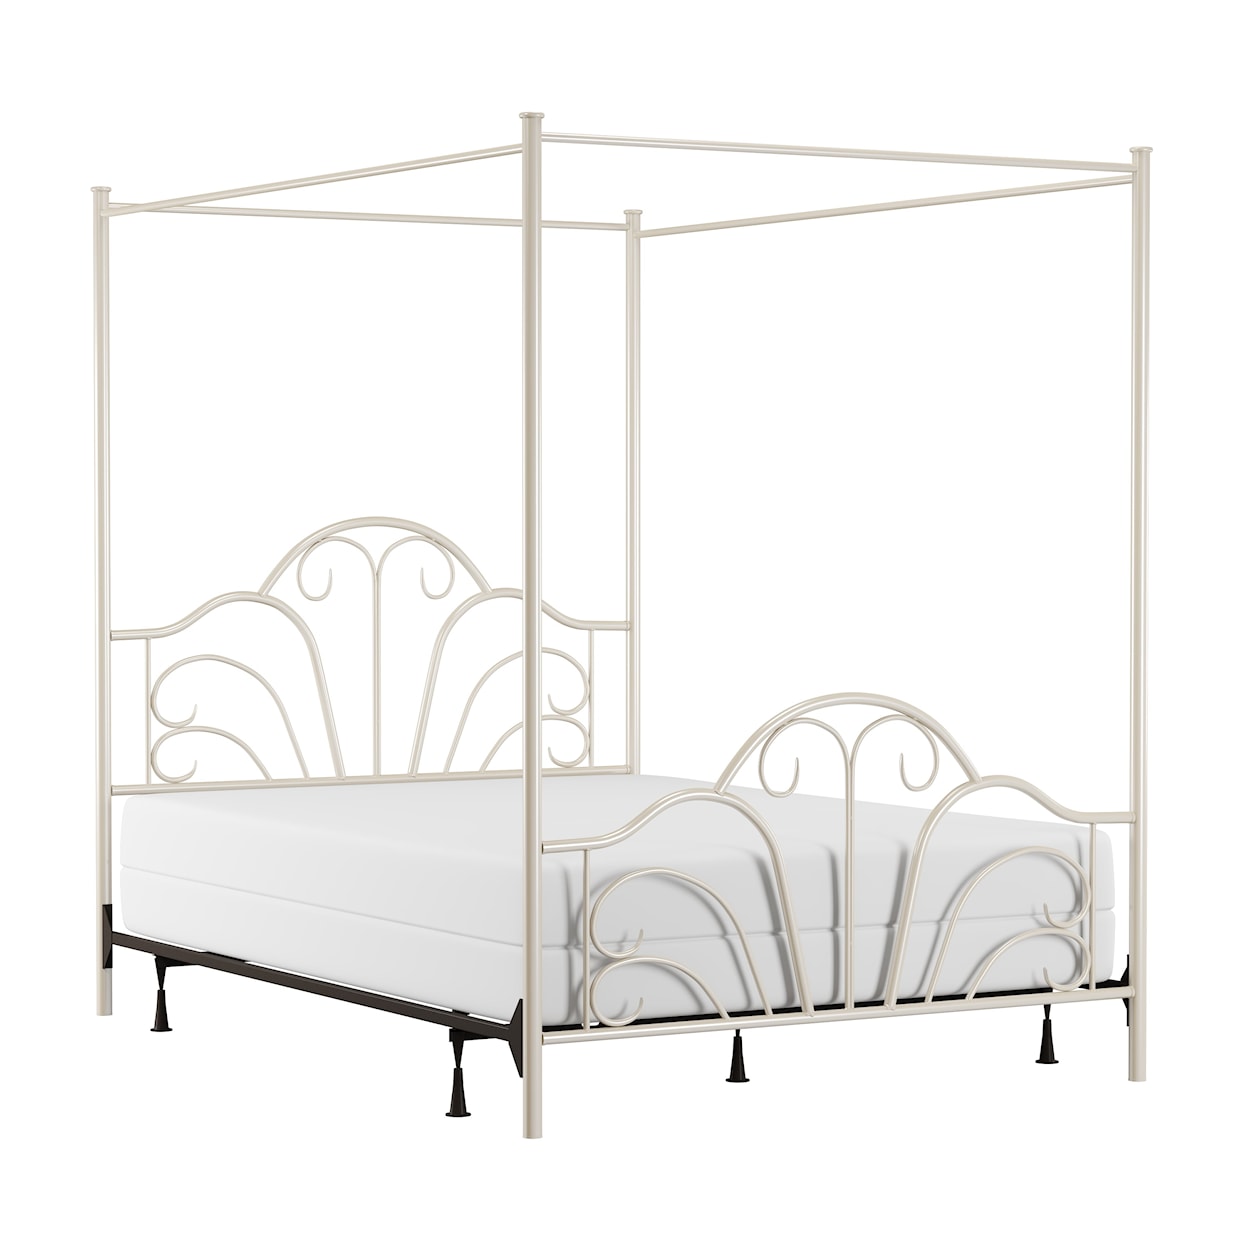 Hillsdale Dover King Bed